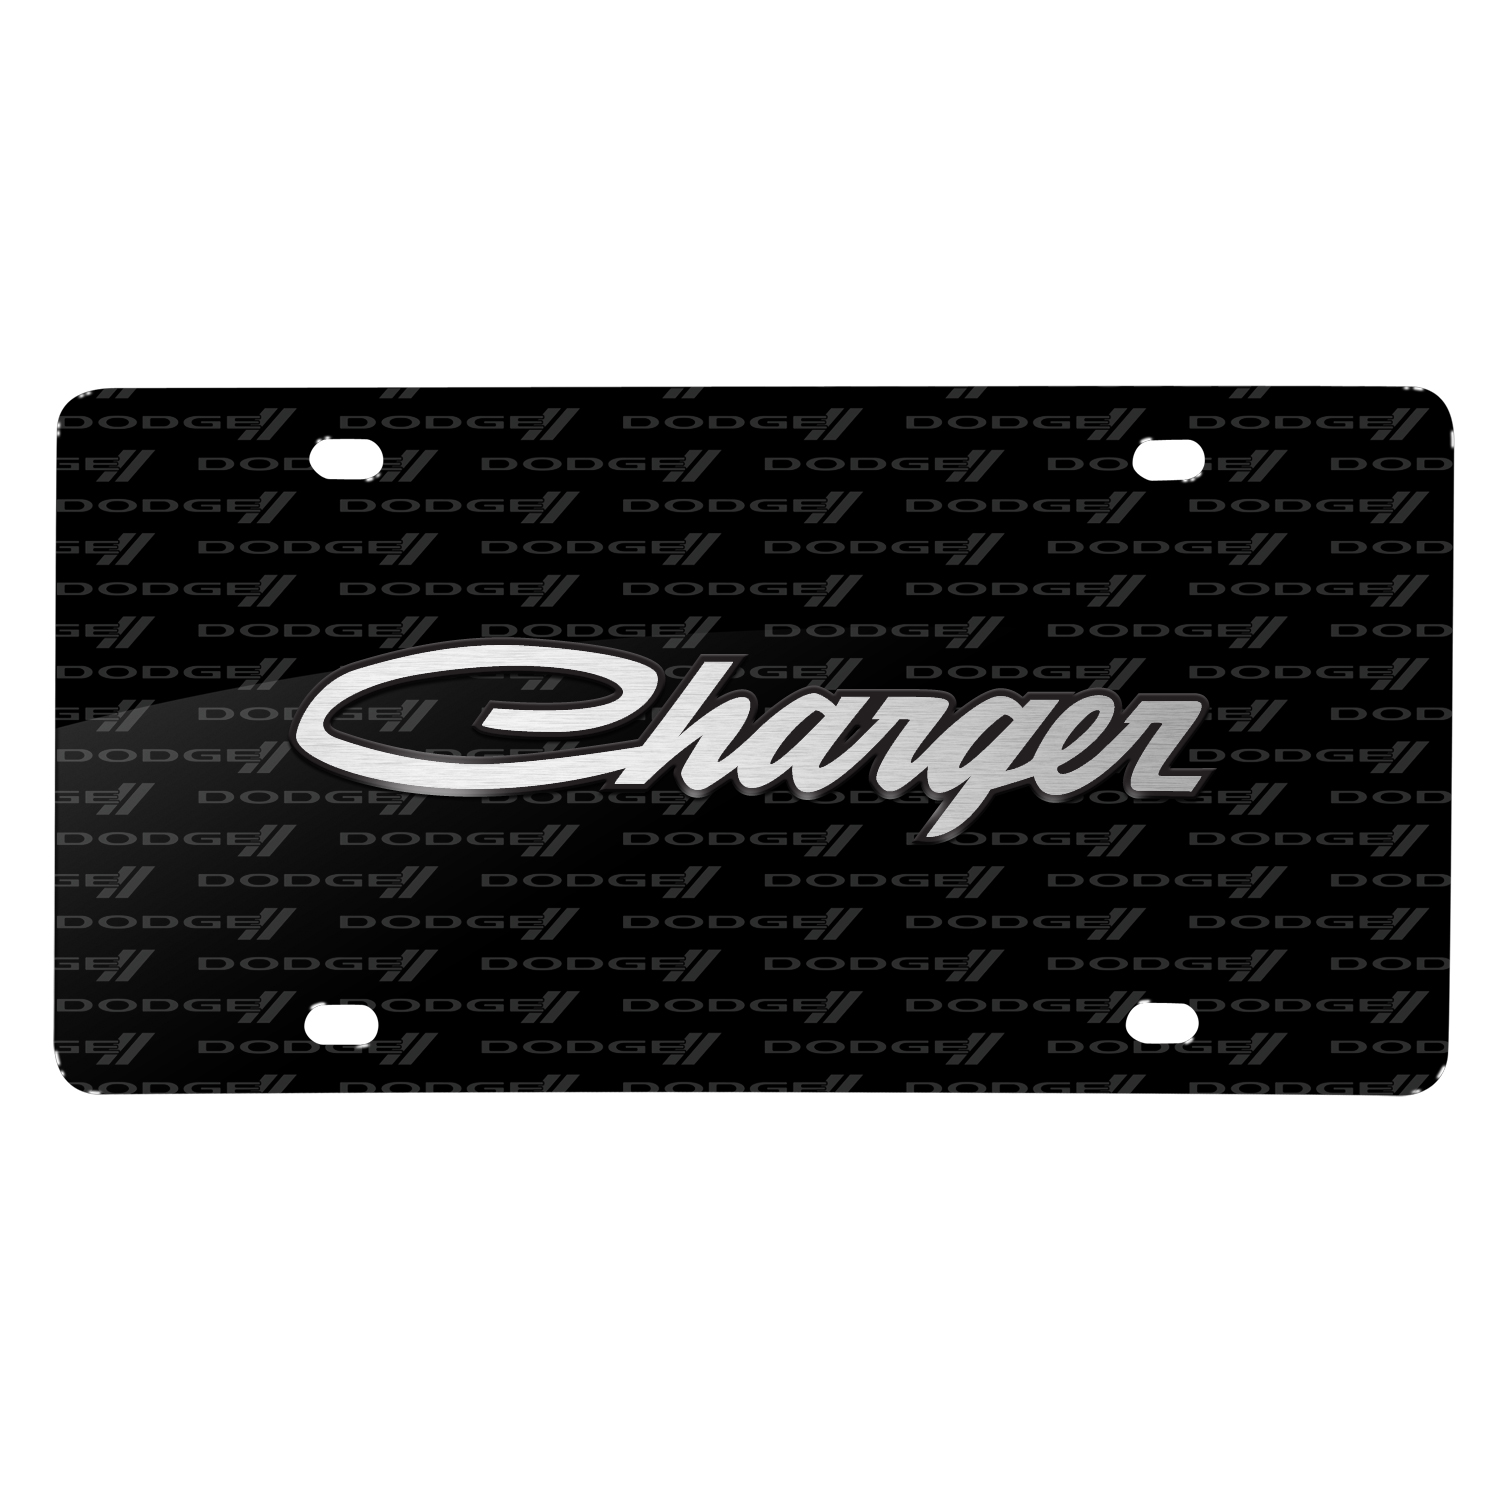 Dodge Charger Classic 3D Logo on Logo Pattern Black Aluminum License Plate - image 1 of 6